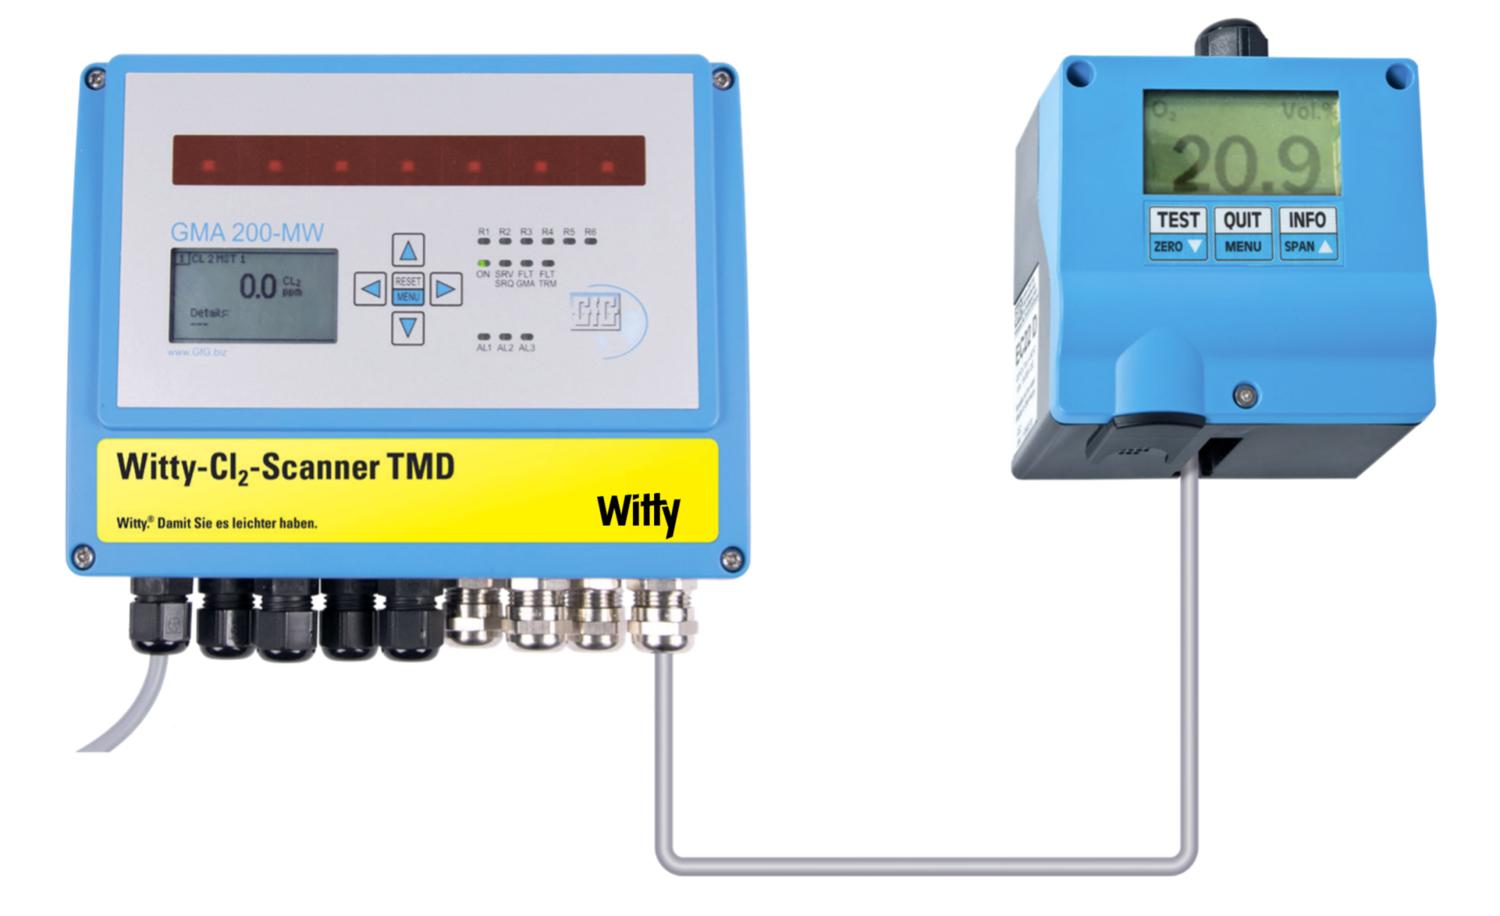 Witty-Cl2-Scanner TMD